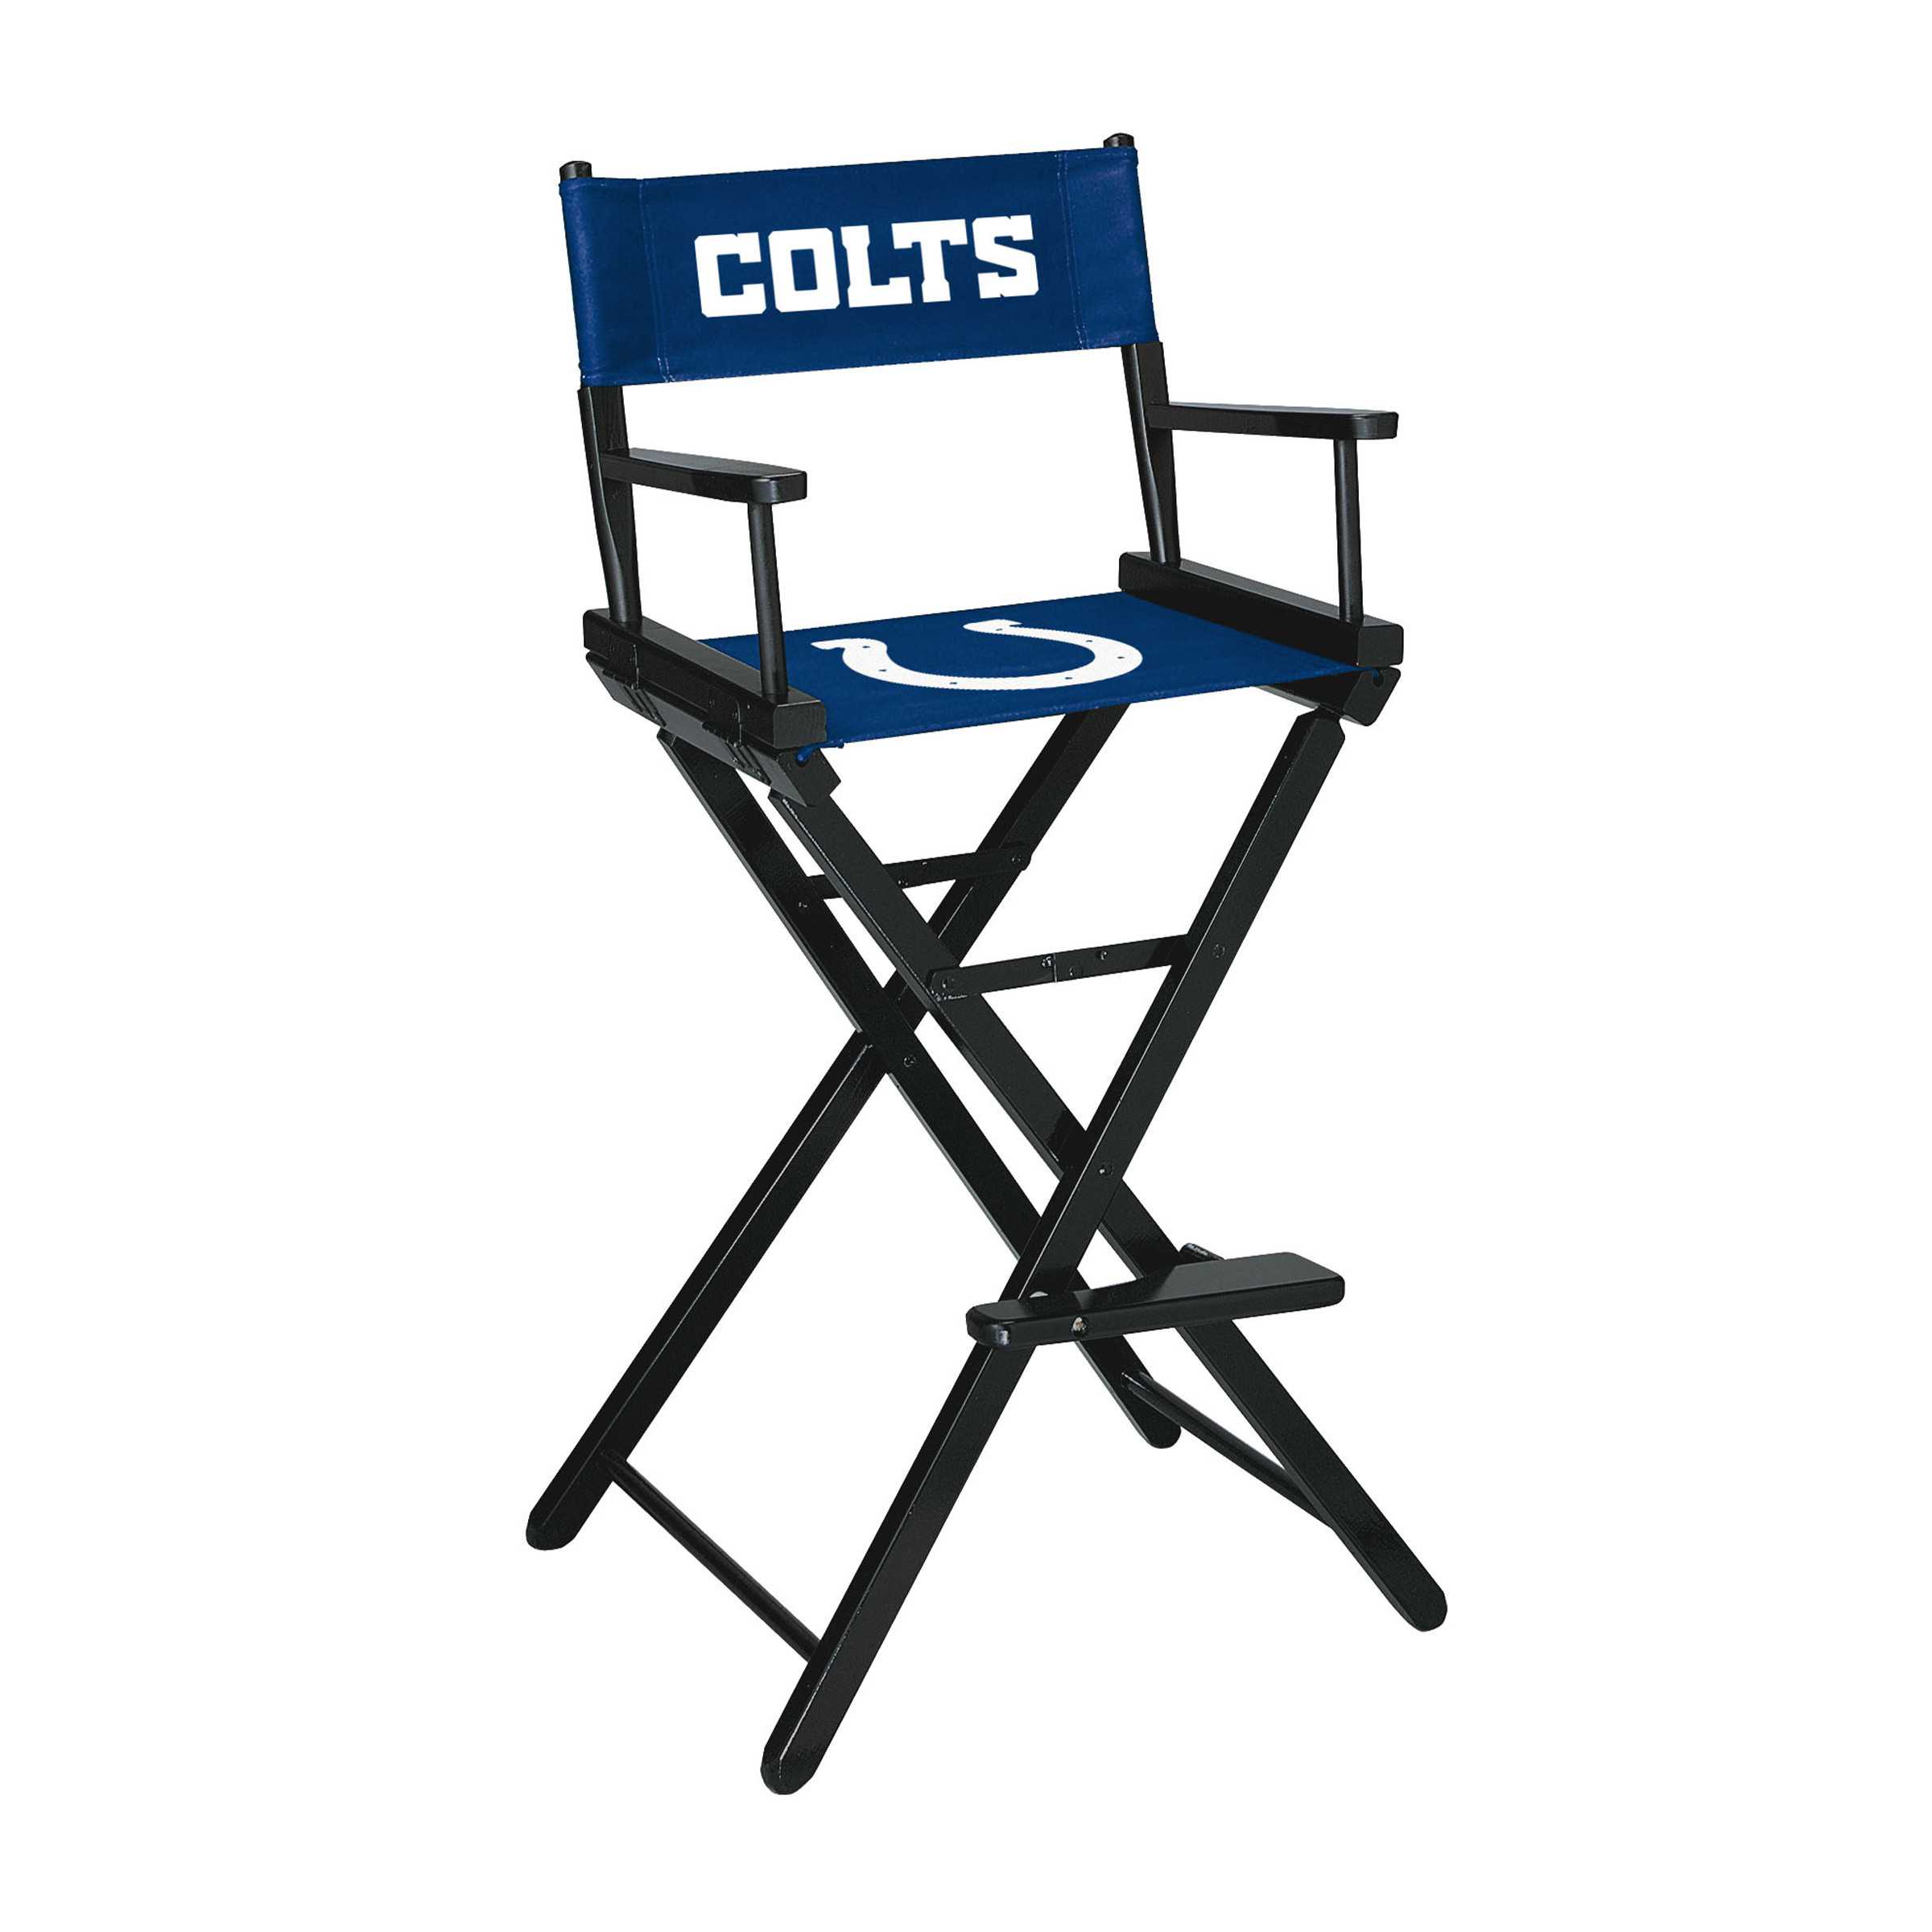 INDIANAPOLIS COLTS BAR HEIGHT DIRECTORS CHAIR